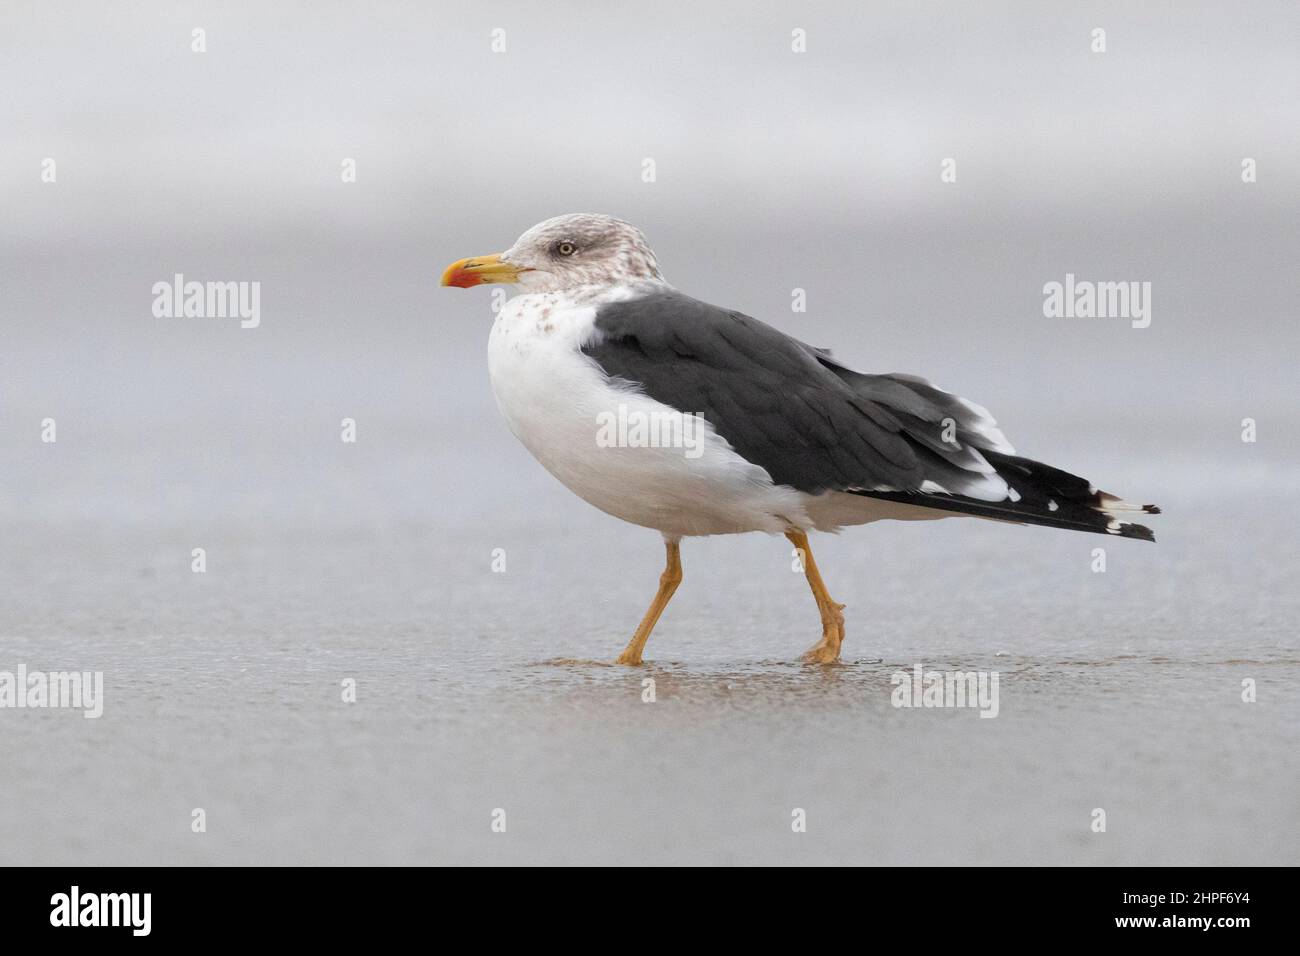 Lesser Black-backed Gull (Larus fuscus intermedius), side view of an adult standing on the shore, Campania, Italy Stock Photo